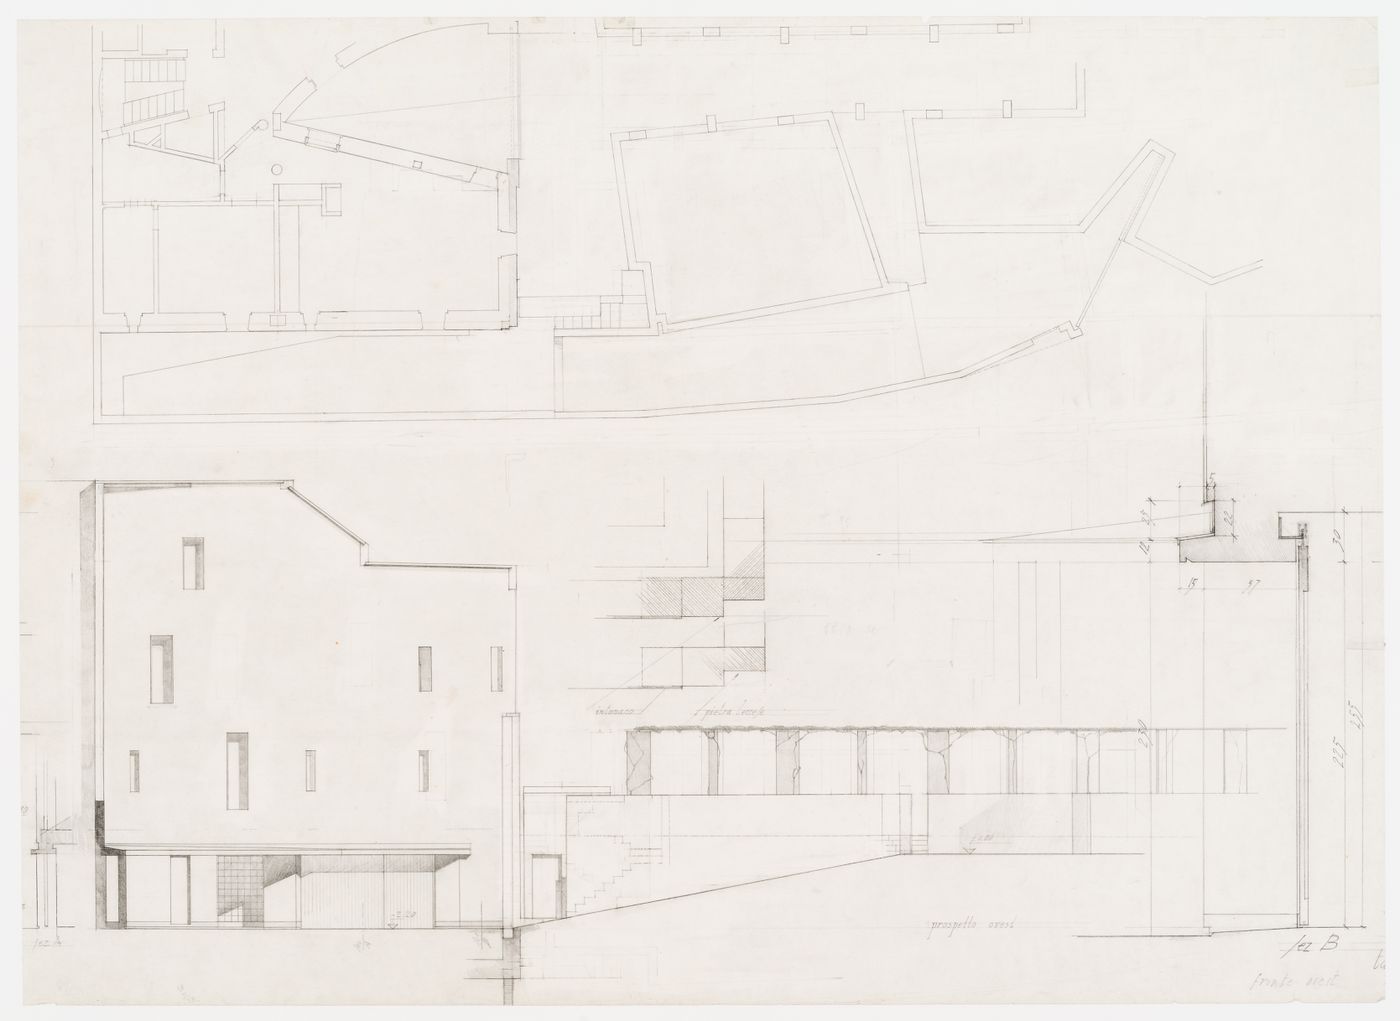 Partial plan of raised ground floor and courtyard, elevation of west façade including view of courtyard for Casa Miggiano, Otranto, Italy